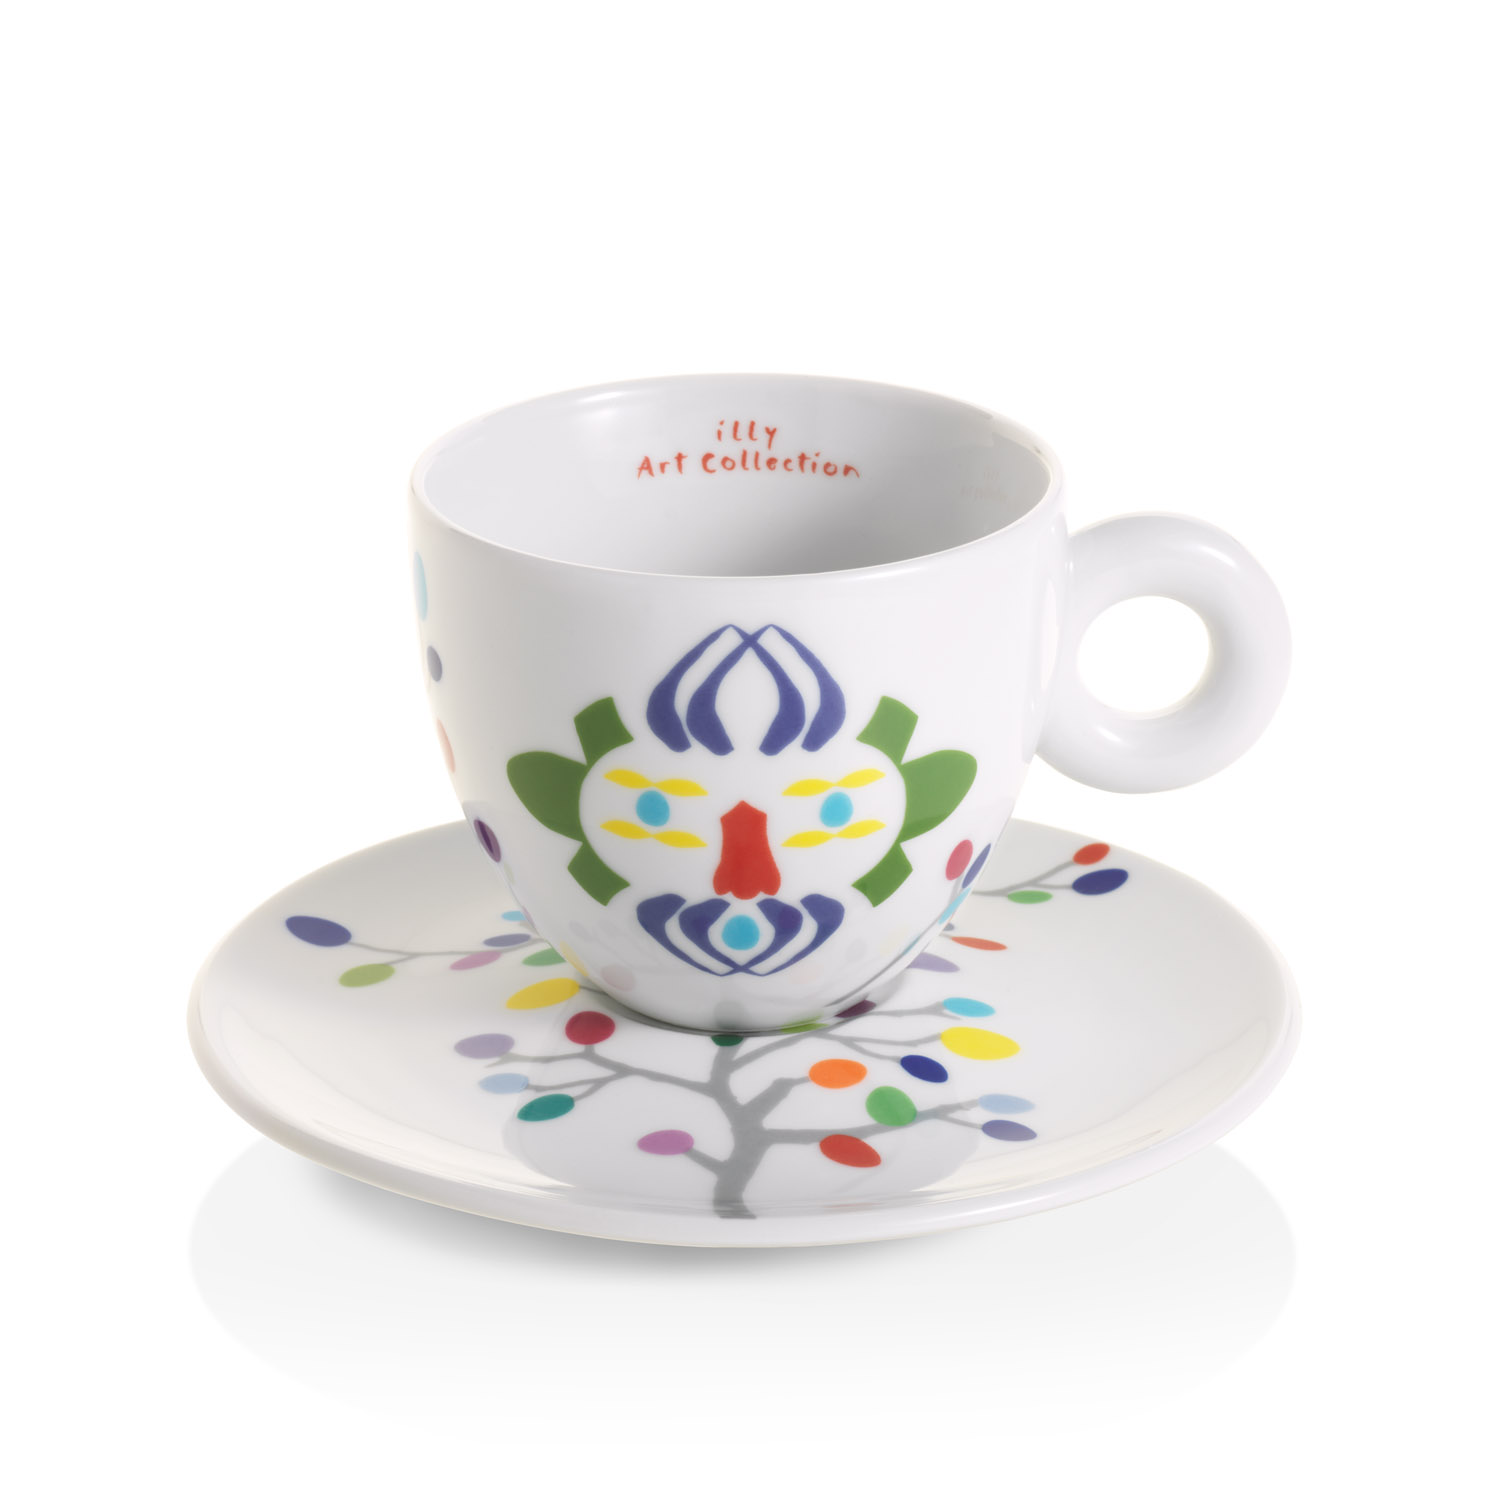 illy Art Collection PASCALE MARTHINE TAYOU Gift Set 2 Cappuccino Cups, Cups, 02-02-6089